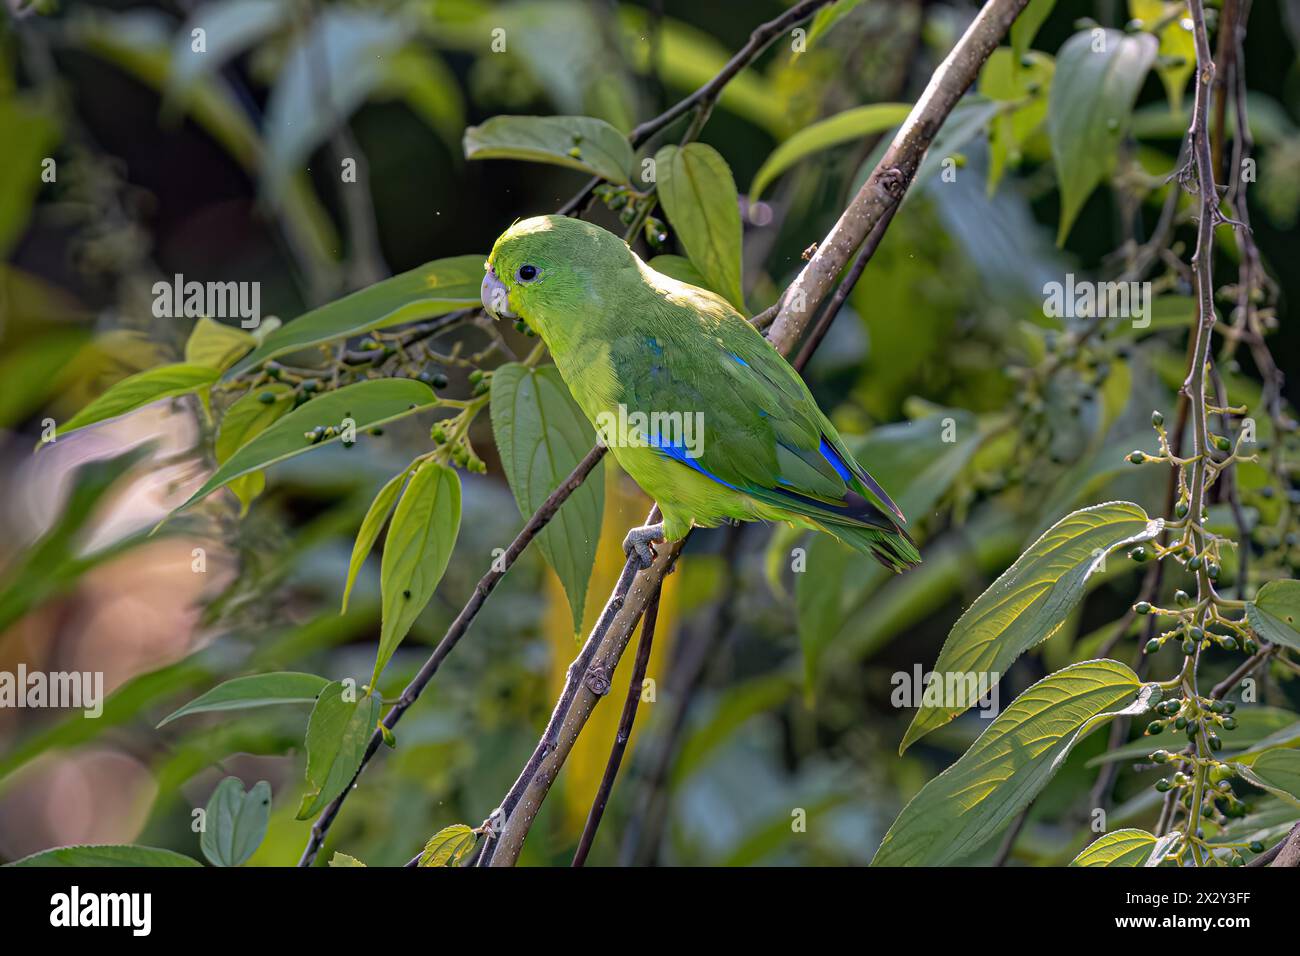 Animal Male Cobalt rumped Parrotlet Bird of the species Forpus xanthopterygius Stock Photo